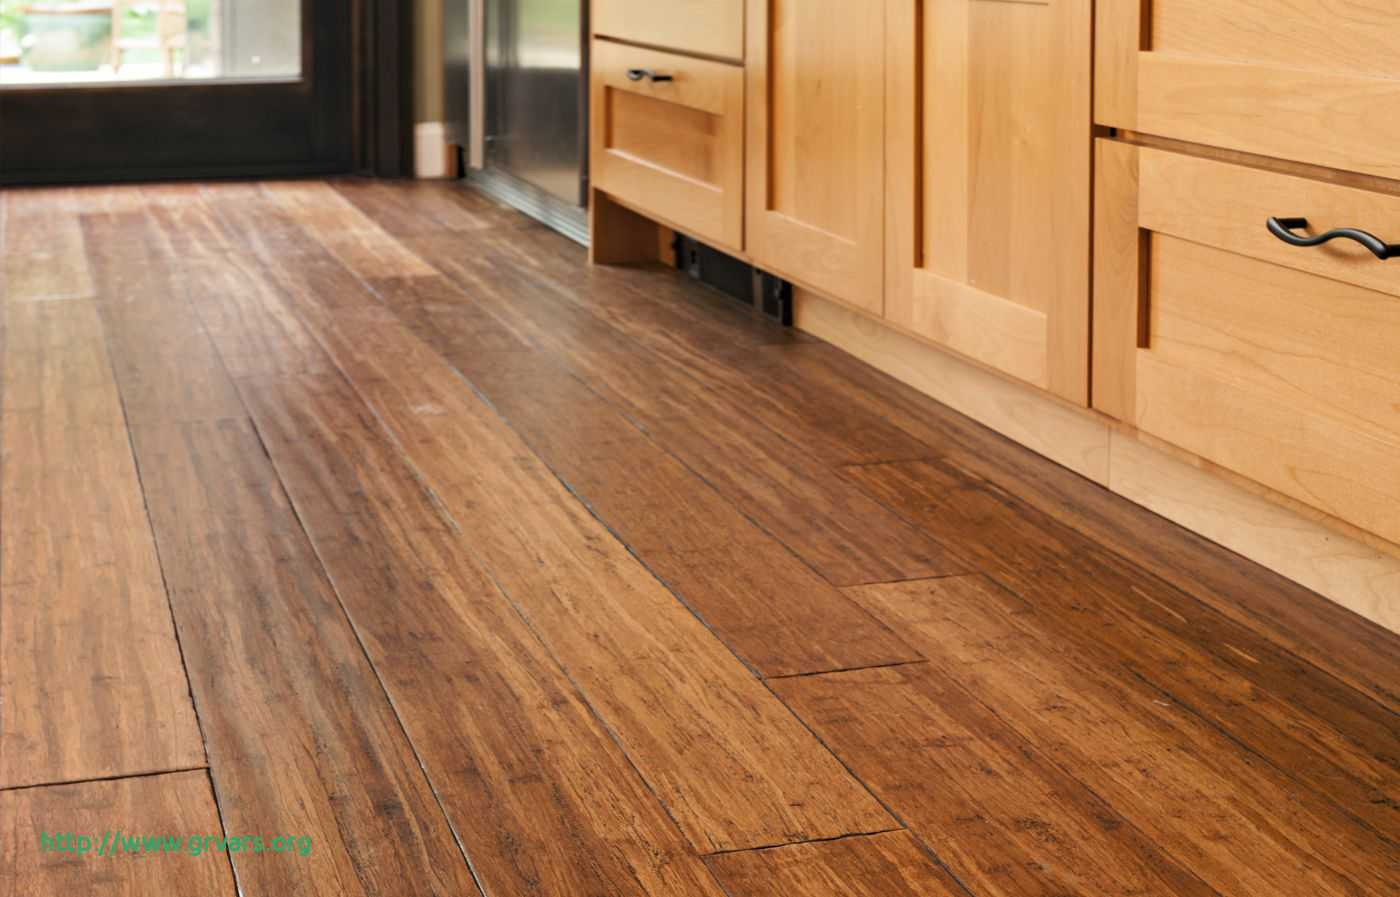 premium hardwood bamboo flooring of 20 charmant how to care for bamboo floors ideas blog regarding how to care for bamboo floors alagant all about bamboo flooring